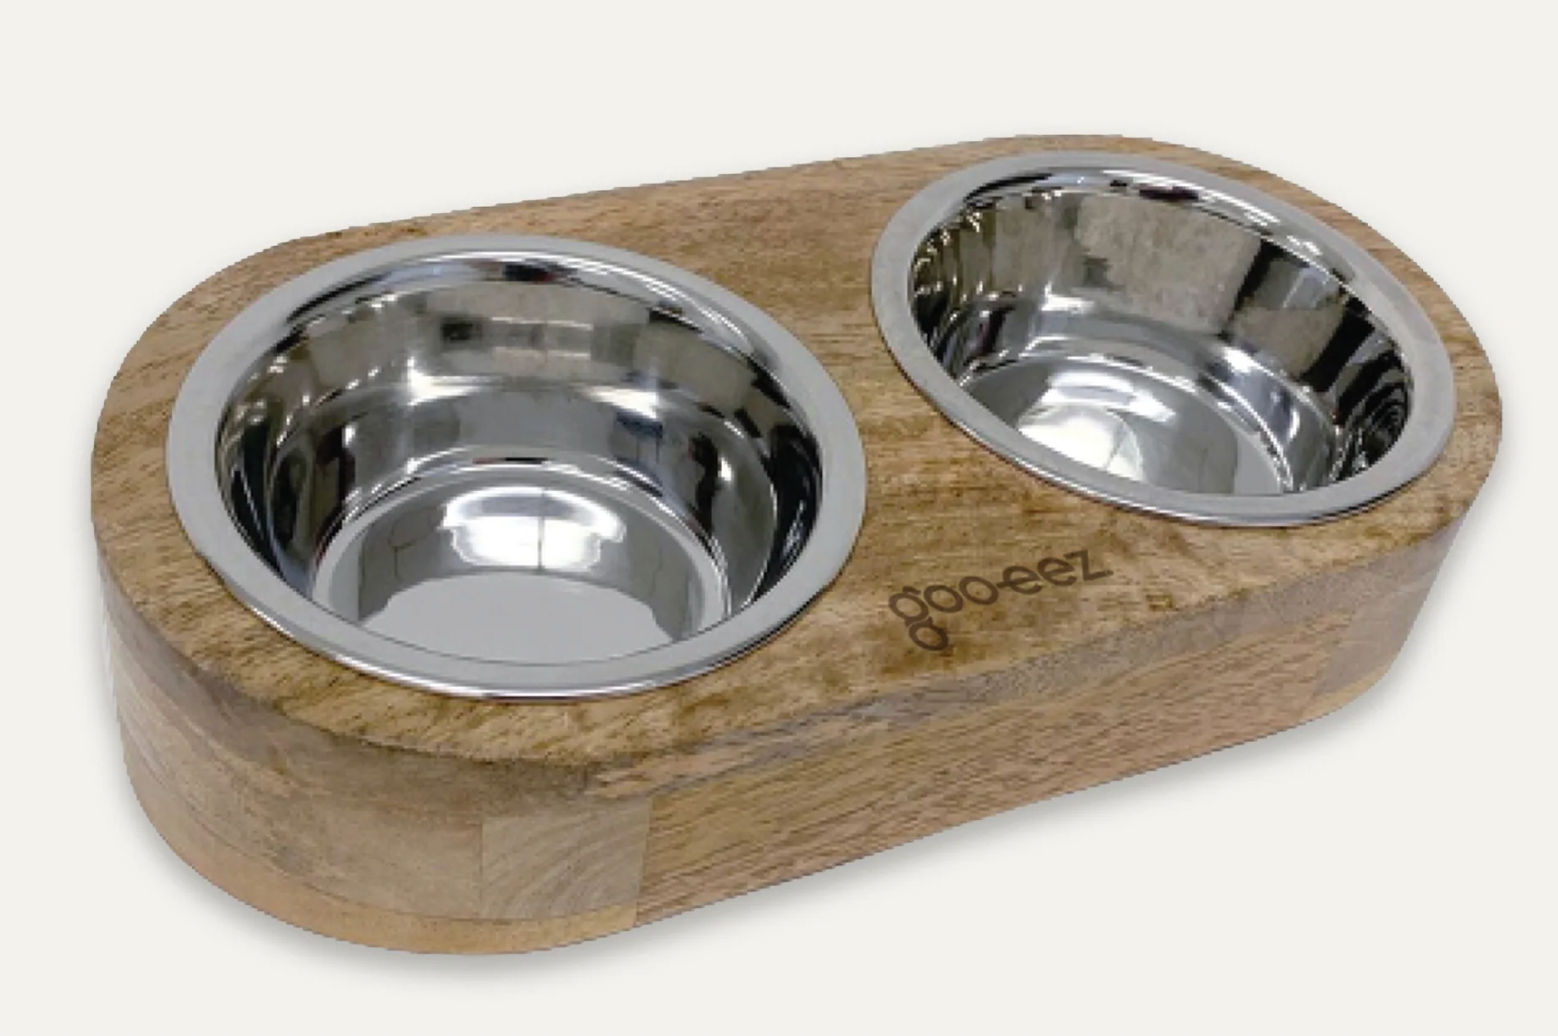 Goo-Eez Inclined Mango Wood Double Feeder with Stainless Steel Bowls